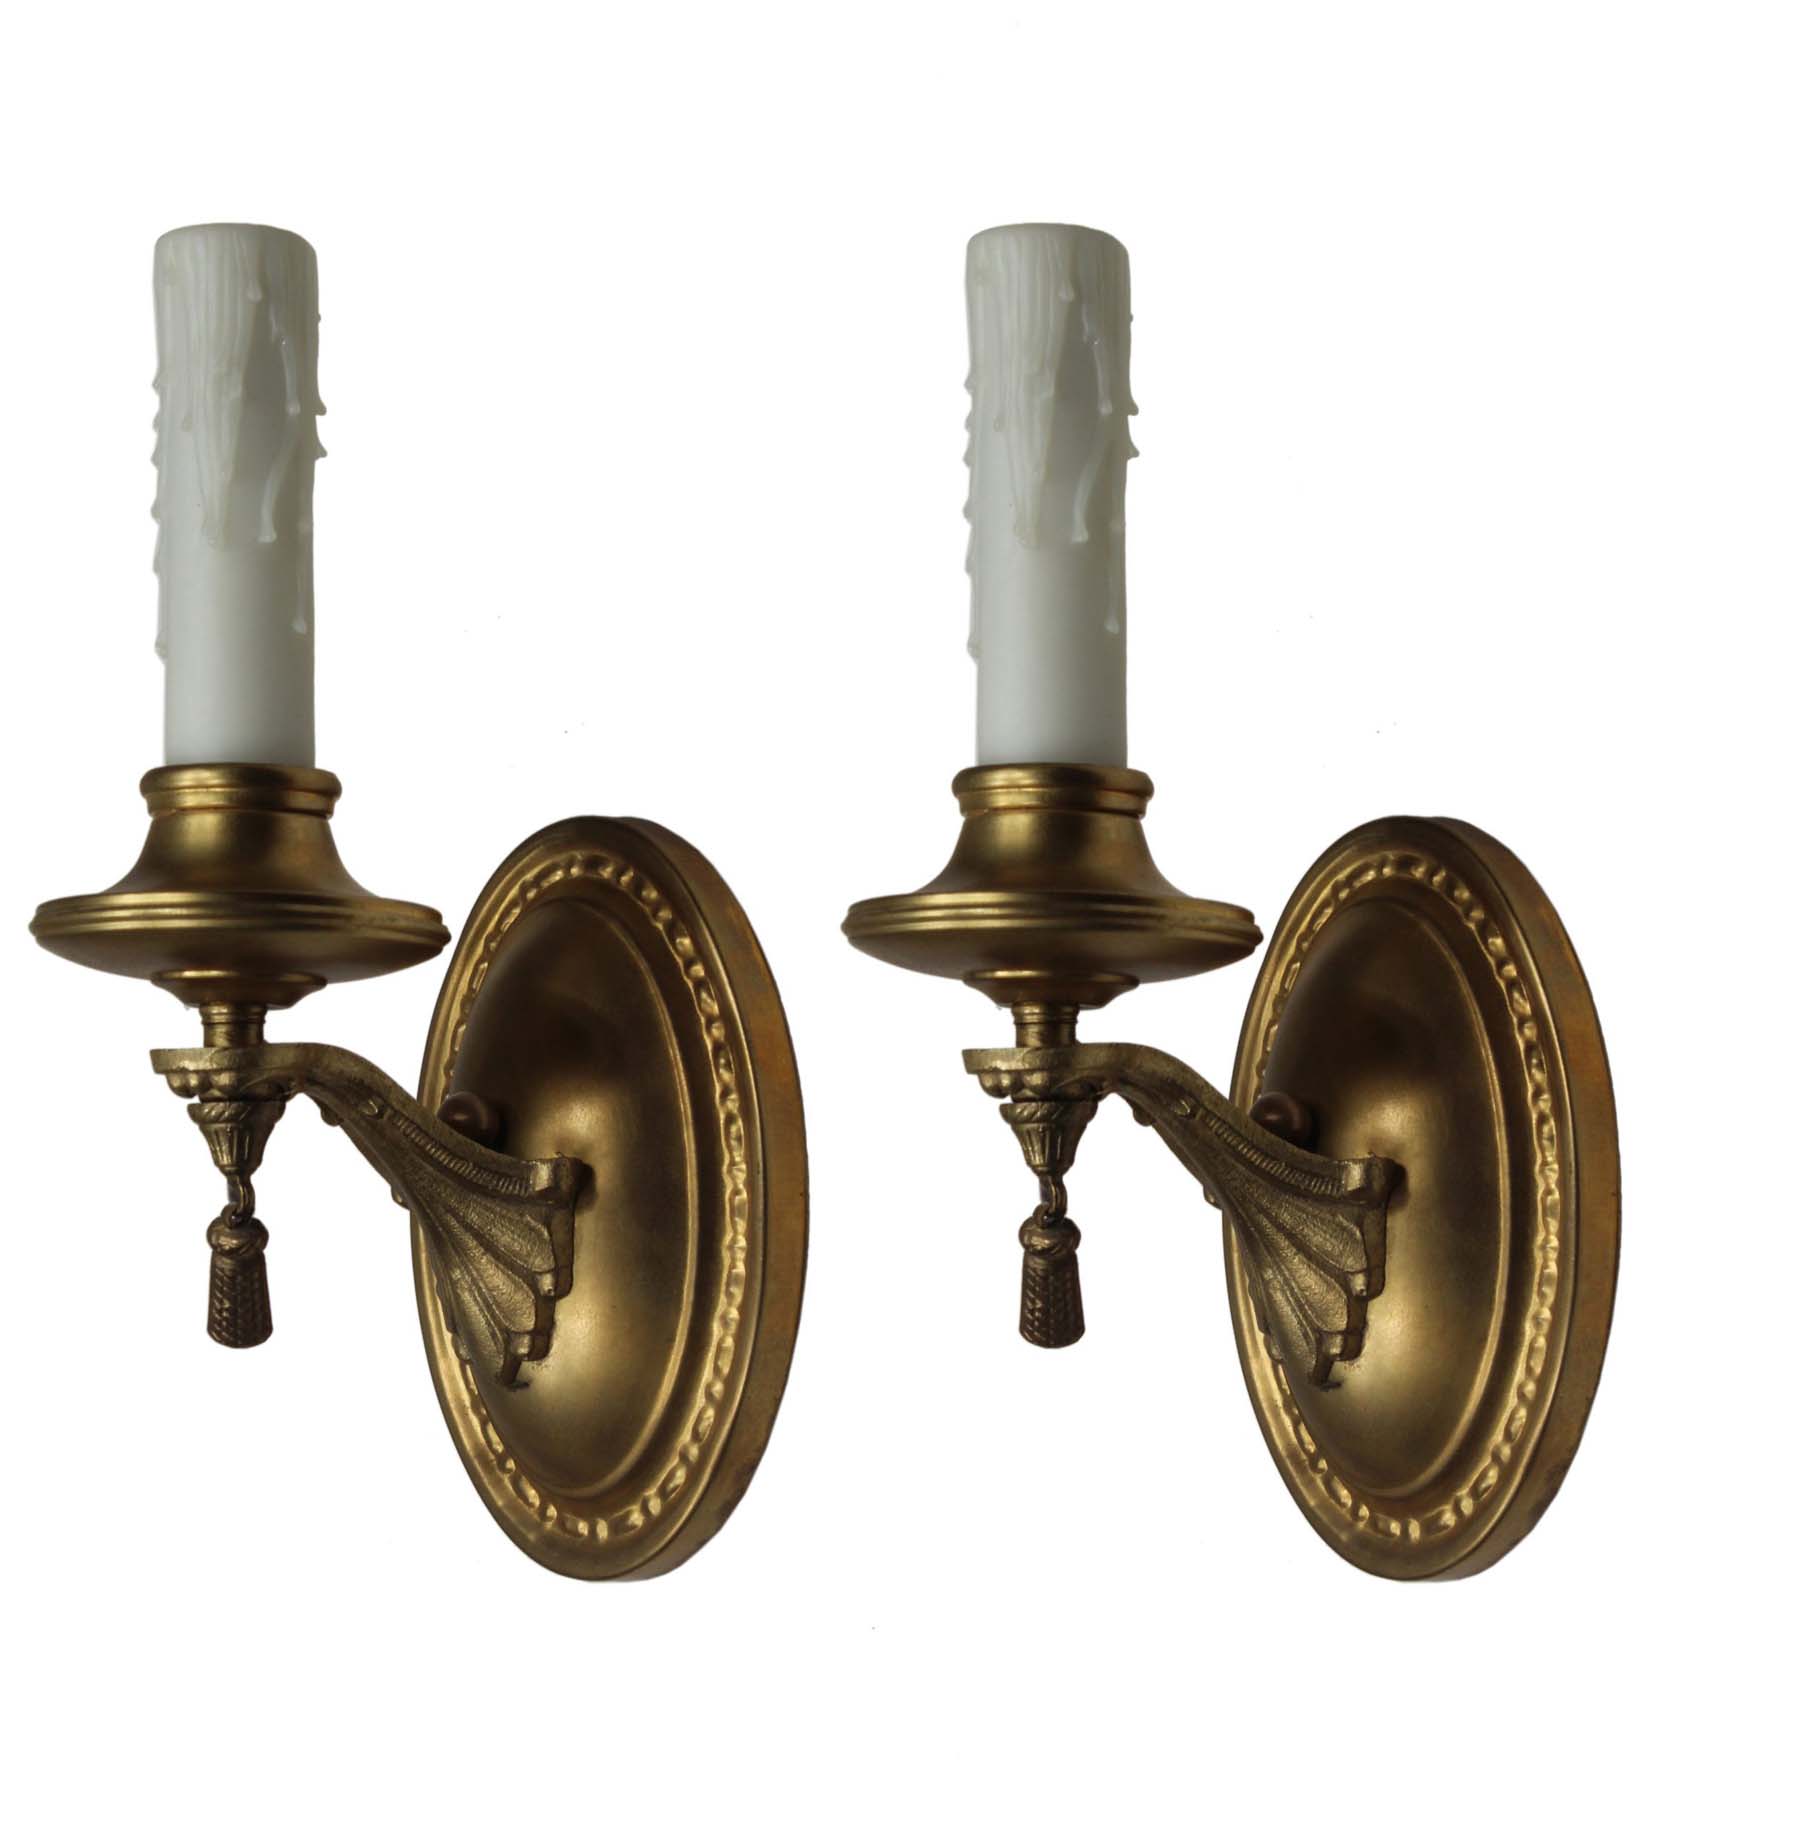 SOLD Pair of Antique Brass Neoclassical Sconces, c. 1920-0